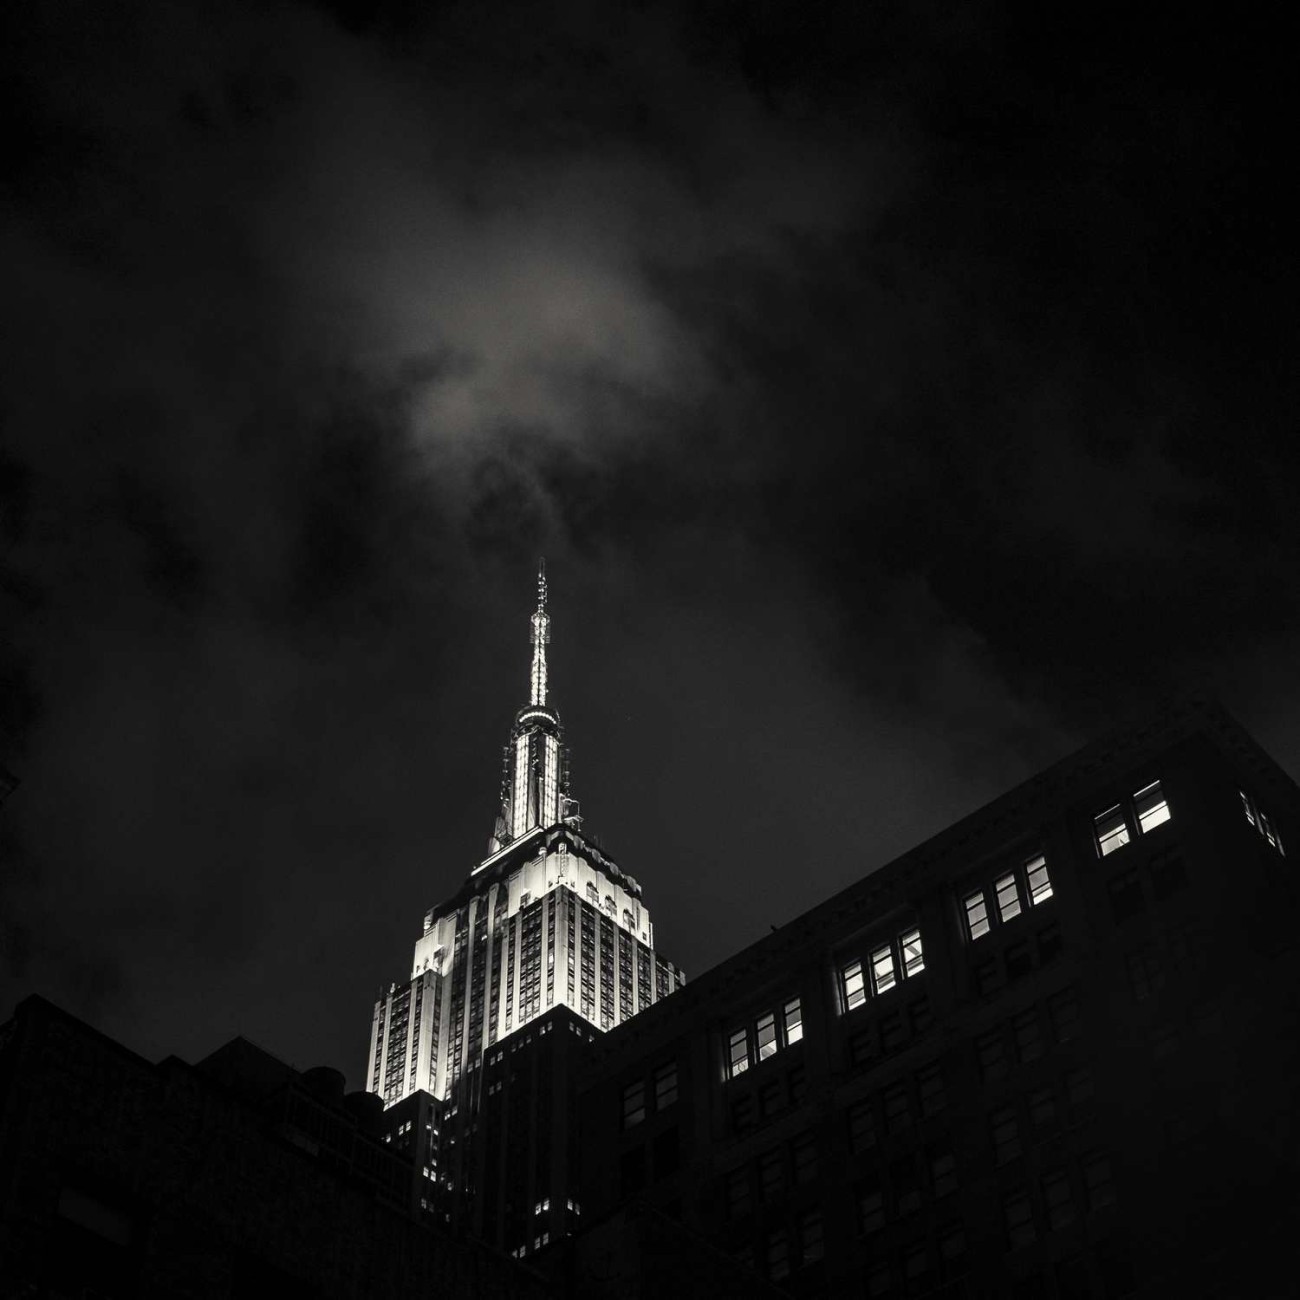 Empire State Building lighting the clouds, NY, 2014